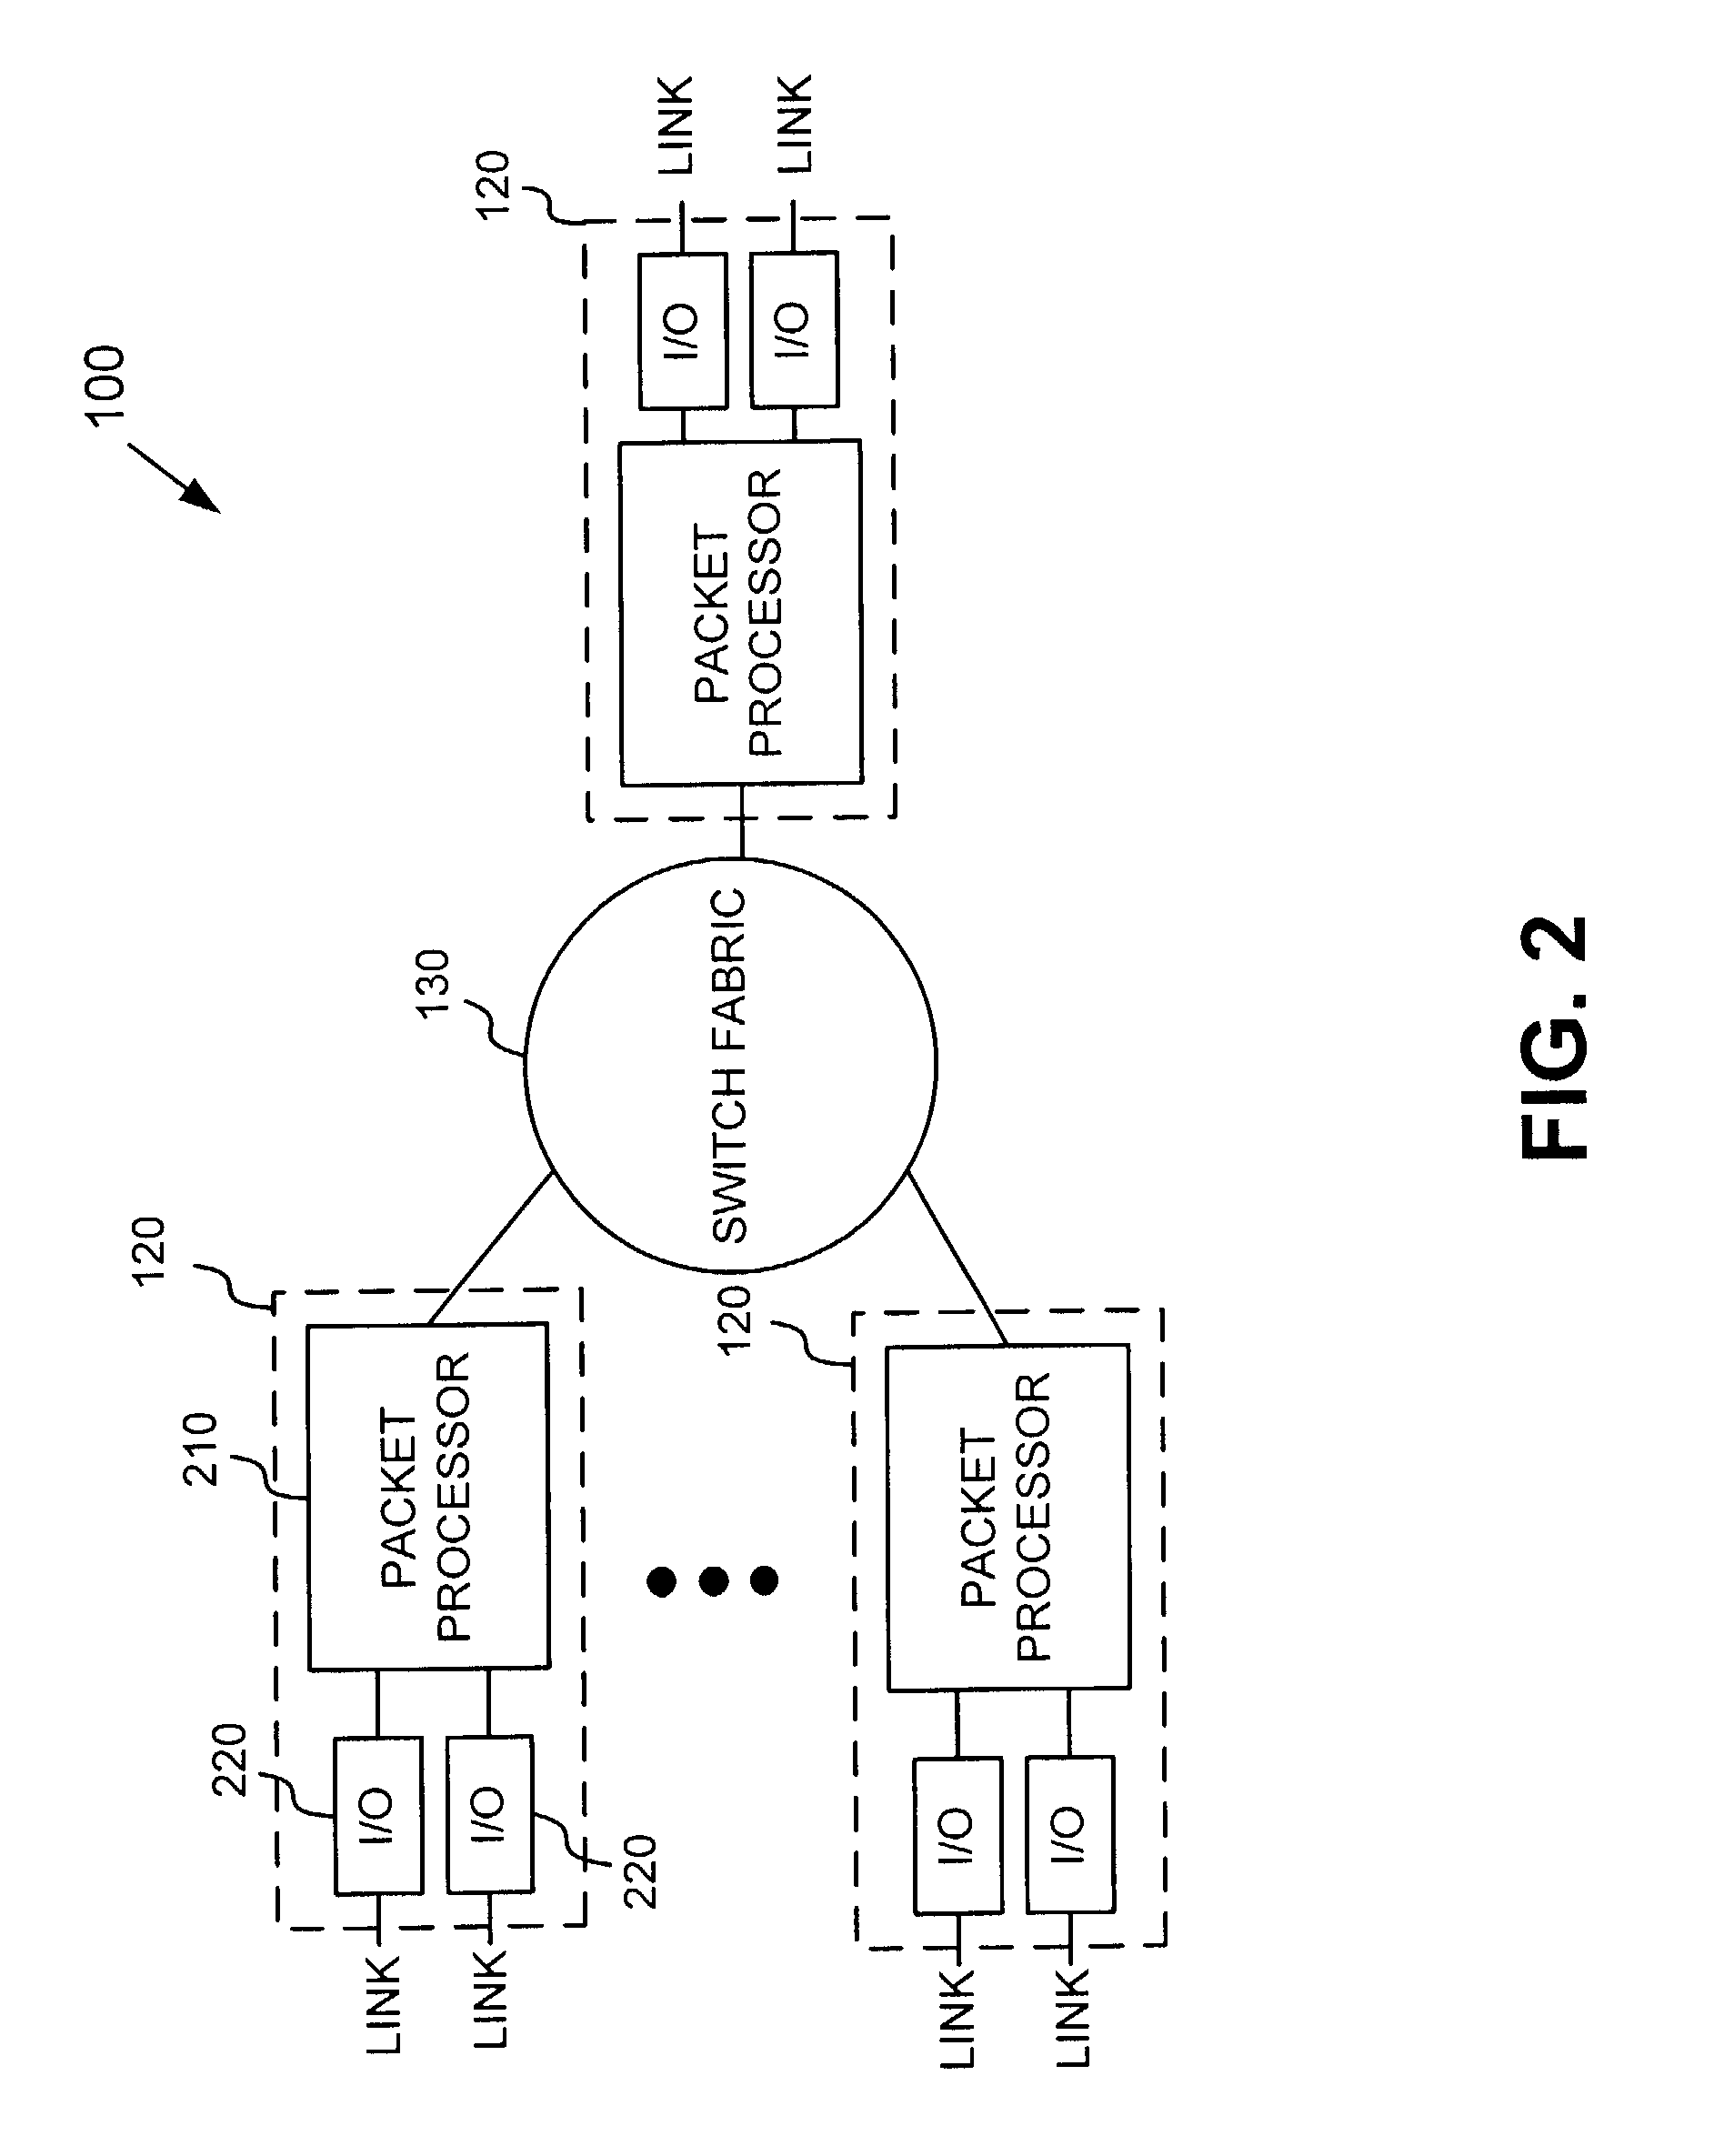 Systems for scheduling the transmission of data in a network device